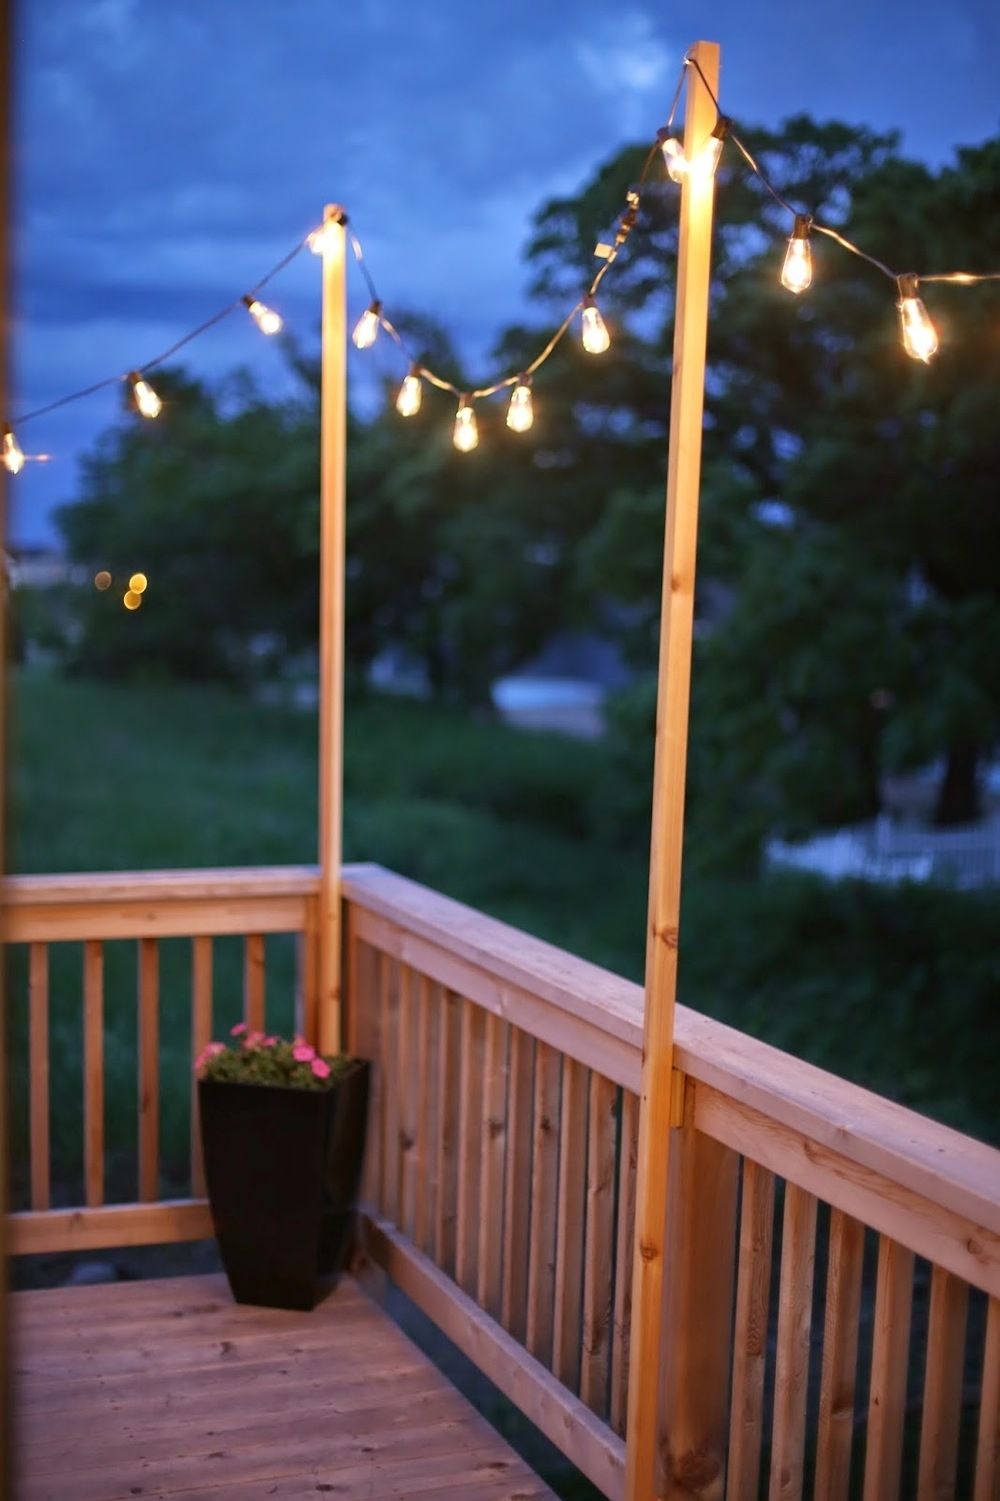 Outdoor String Lights Led Deck Diy Porch Backyard Target Patio With Hanging Outdoor Lights On Deck (View 9 of 15)